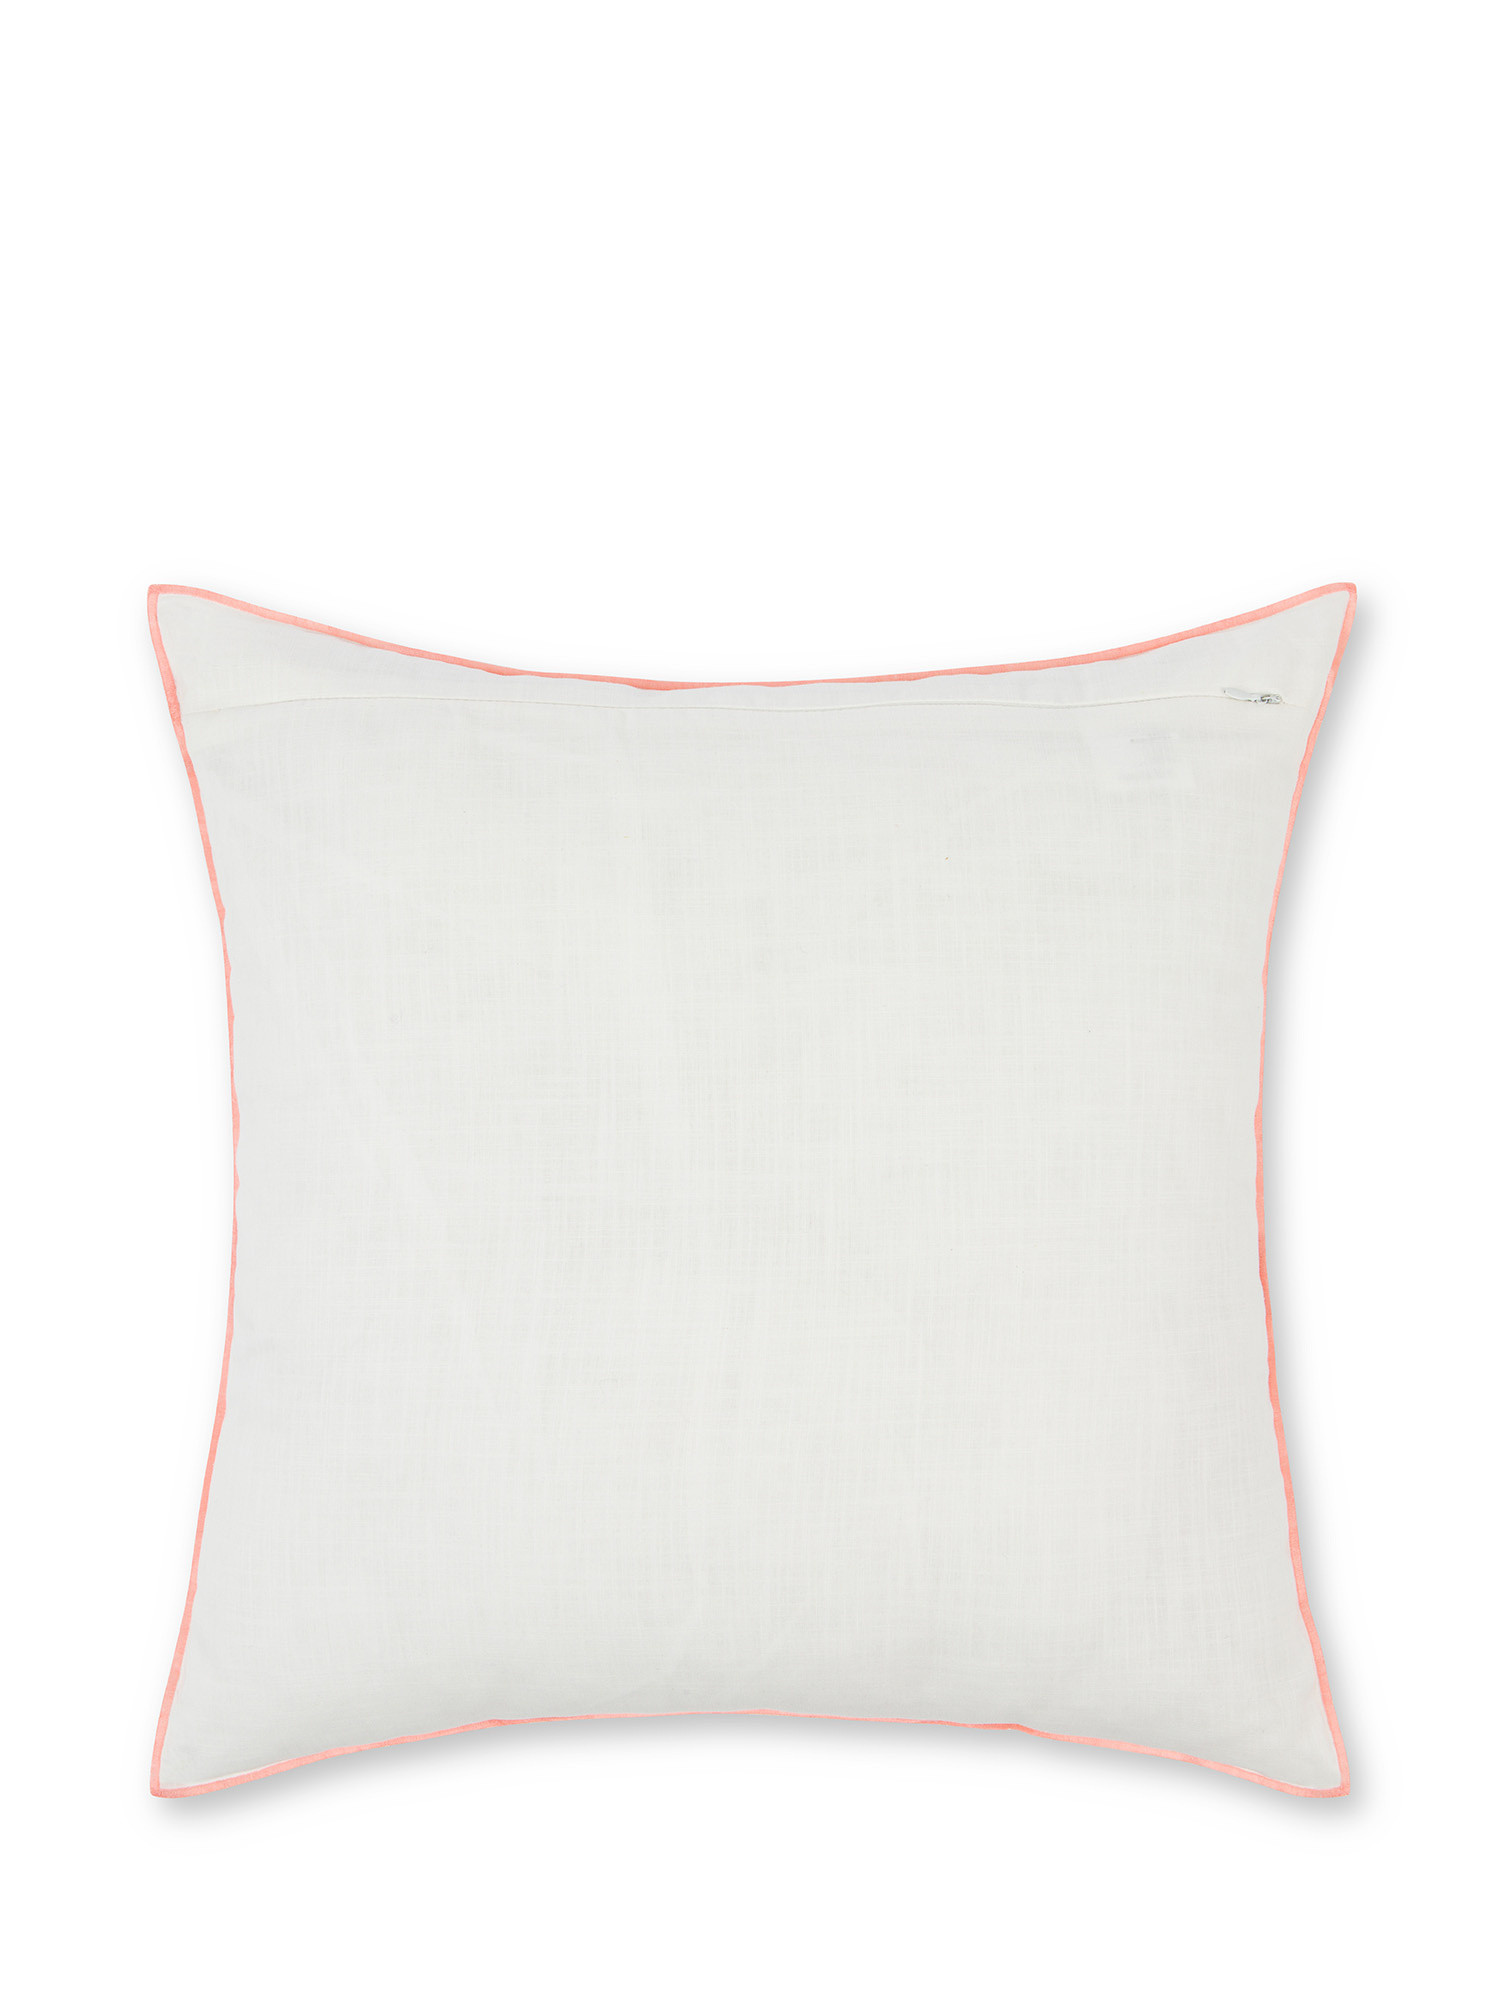 Cotton cushion with embroidery 45x45cm, Pink, large image number 1